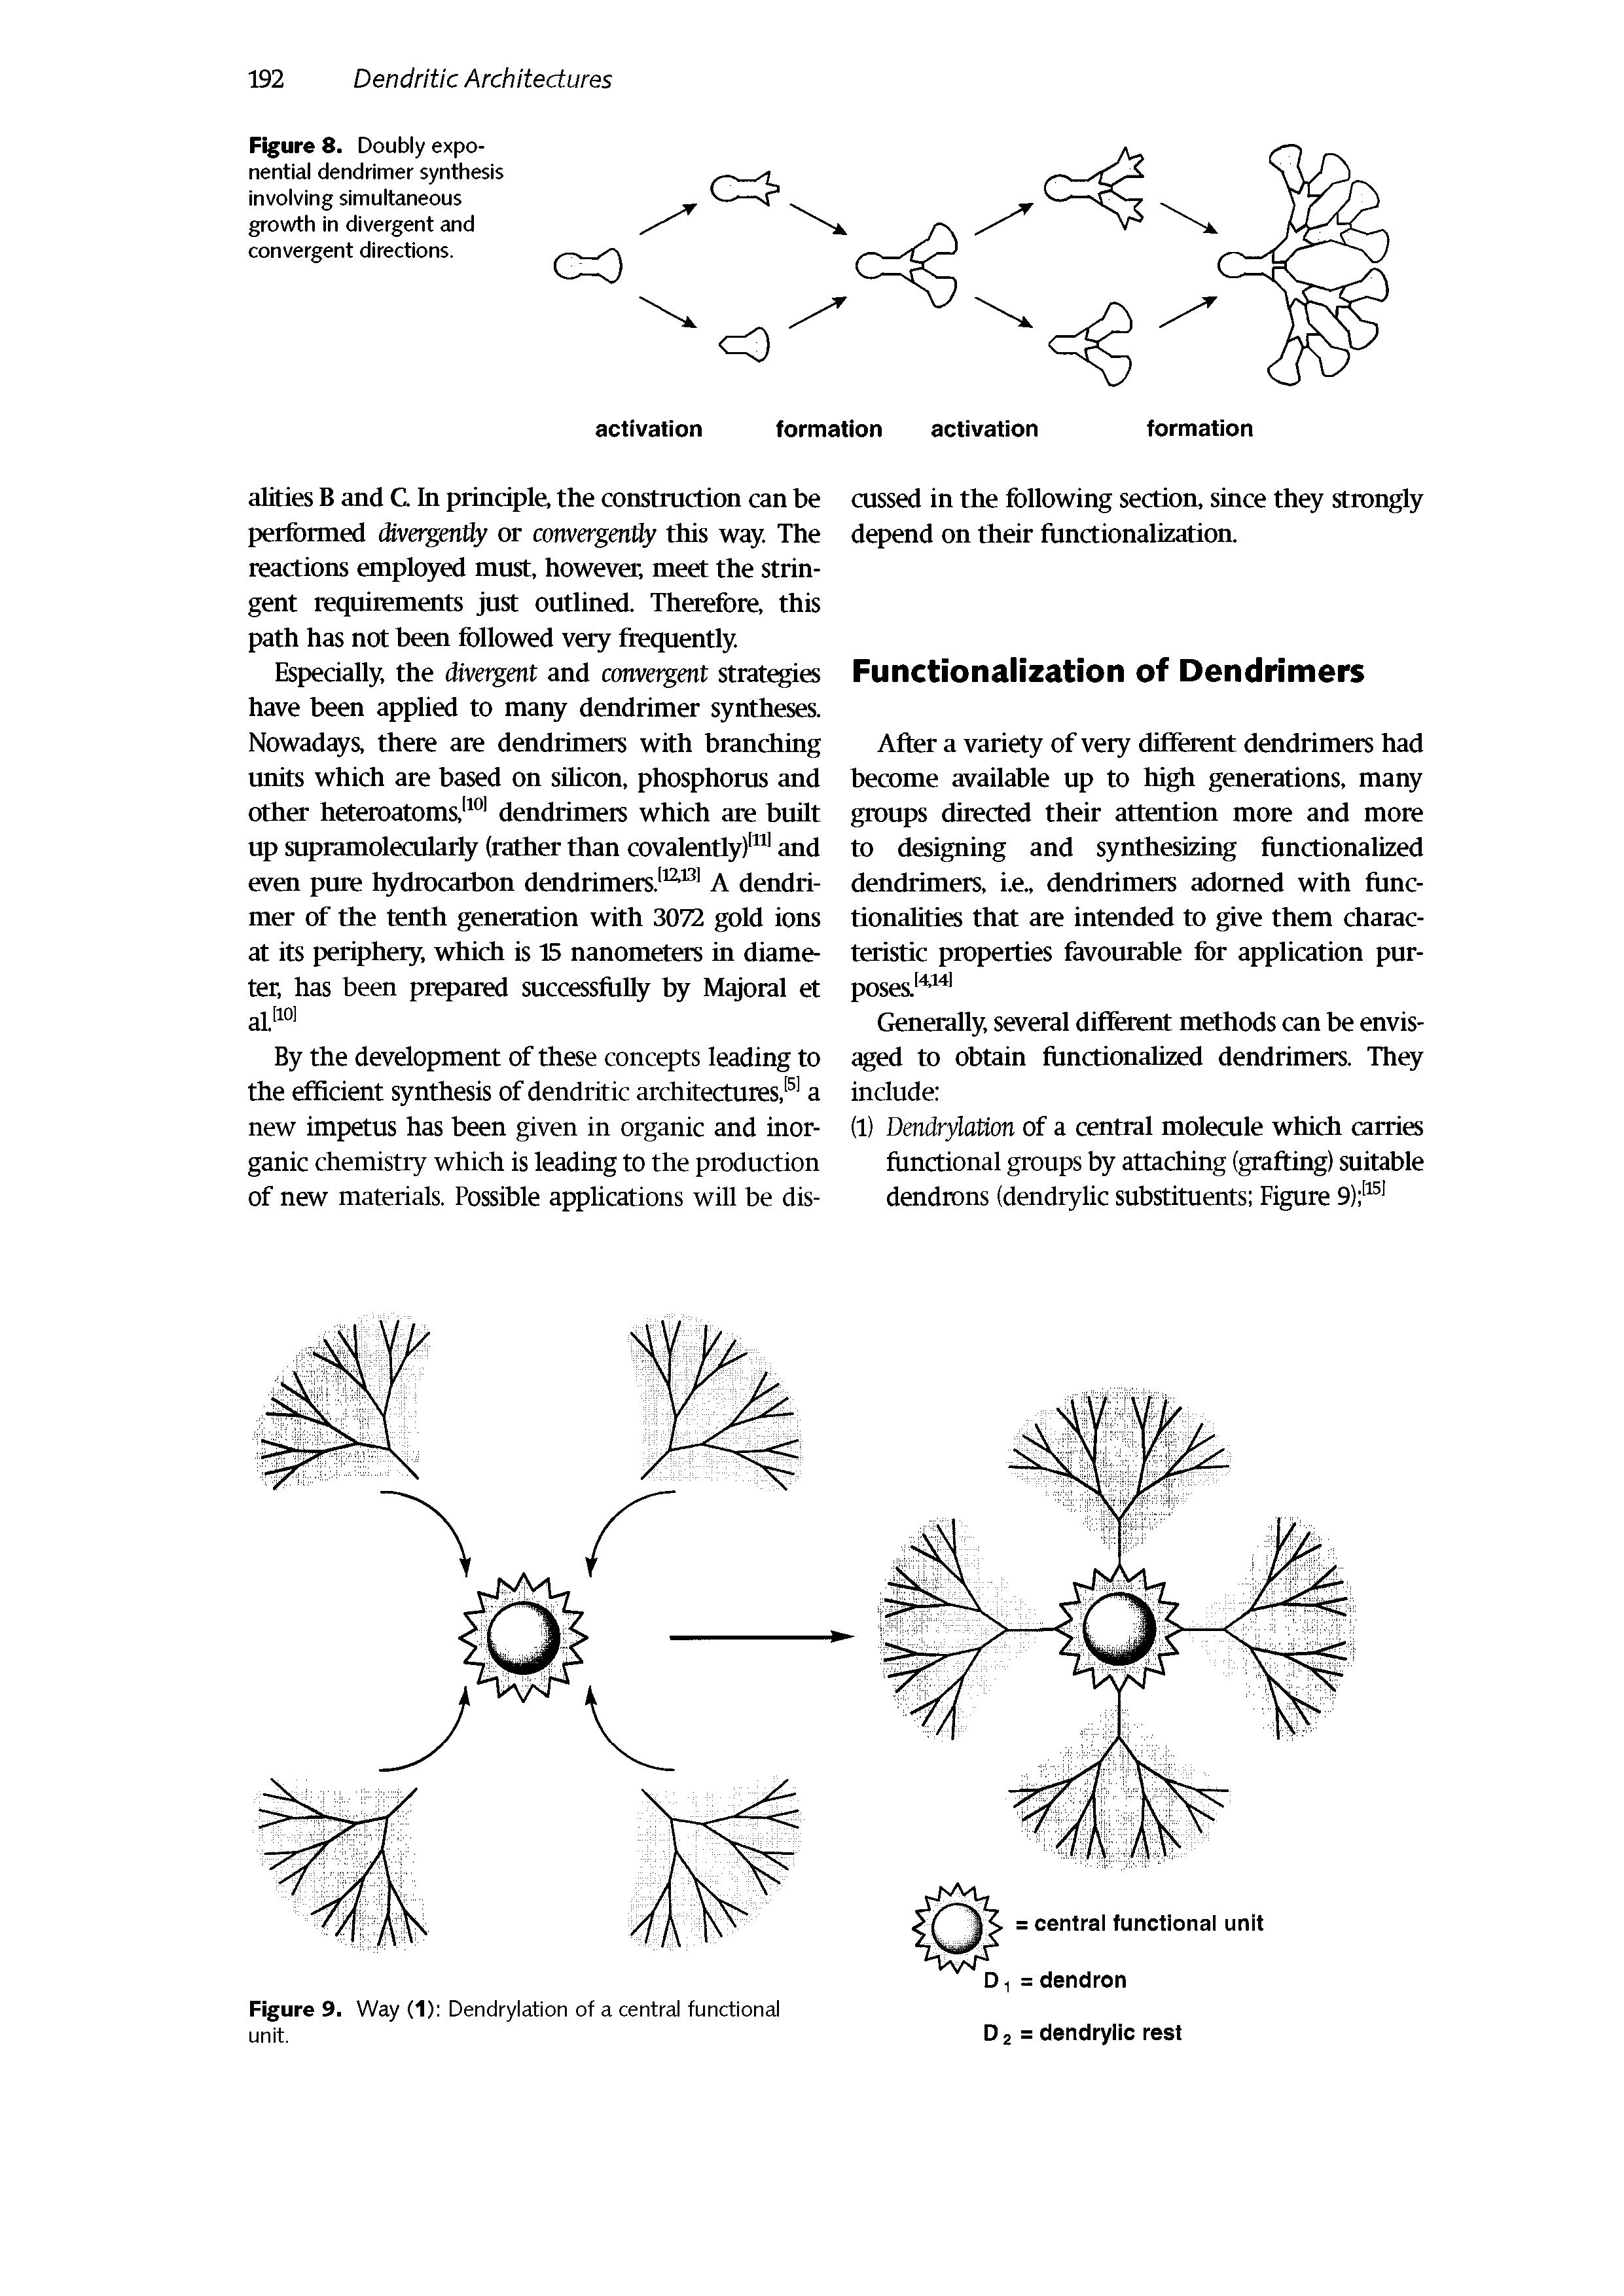 Figure 8. Doubly exponential dendrimer synthesis involving simultaneous growth in divergent and convergent directions.